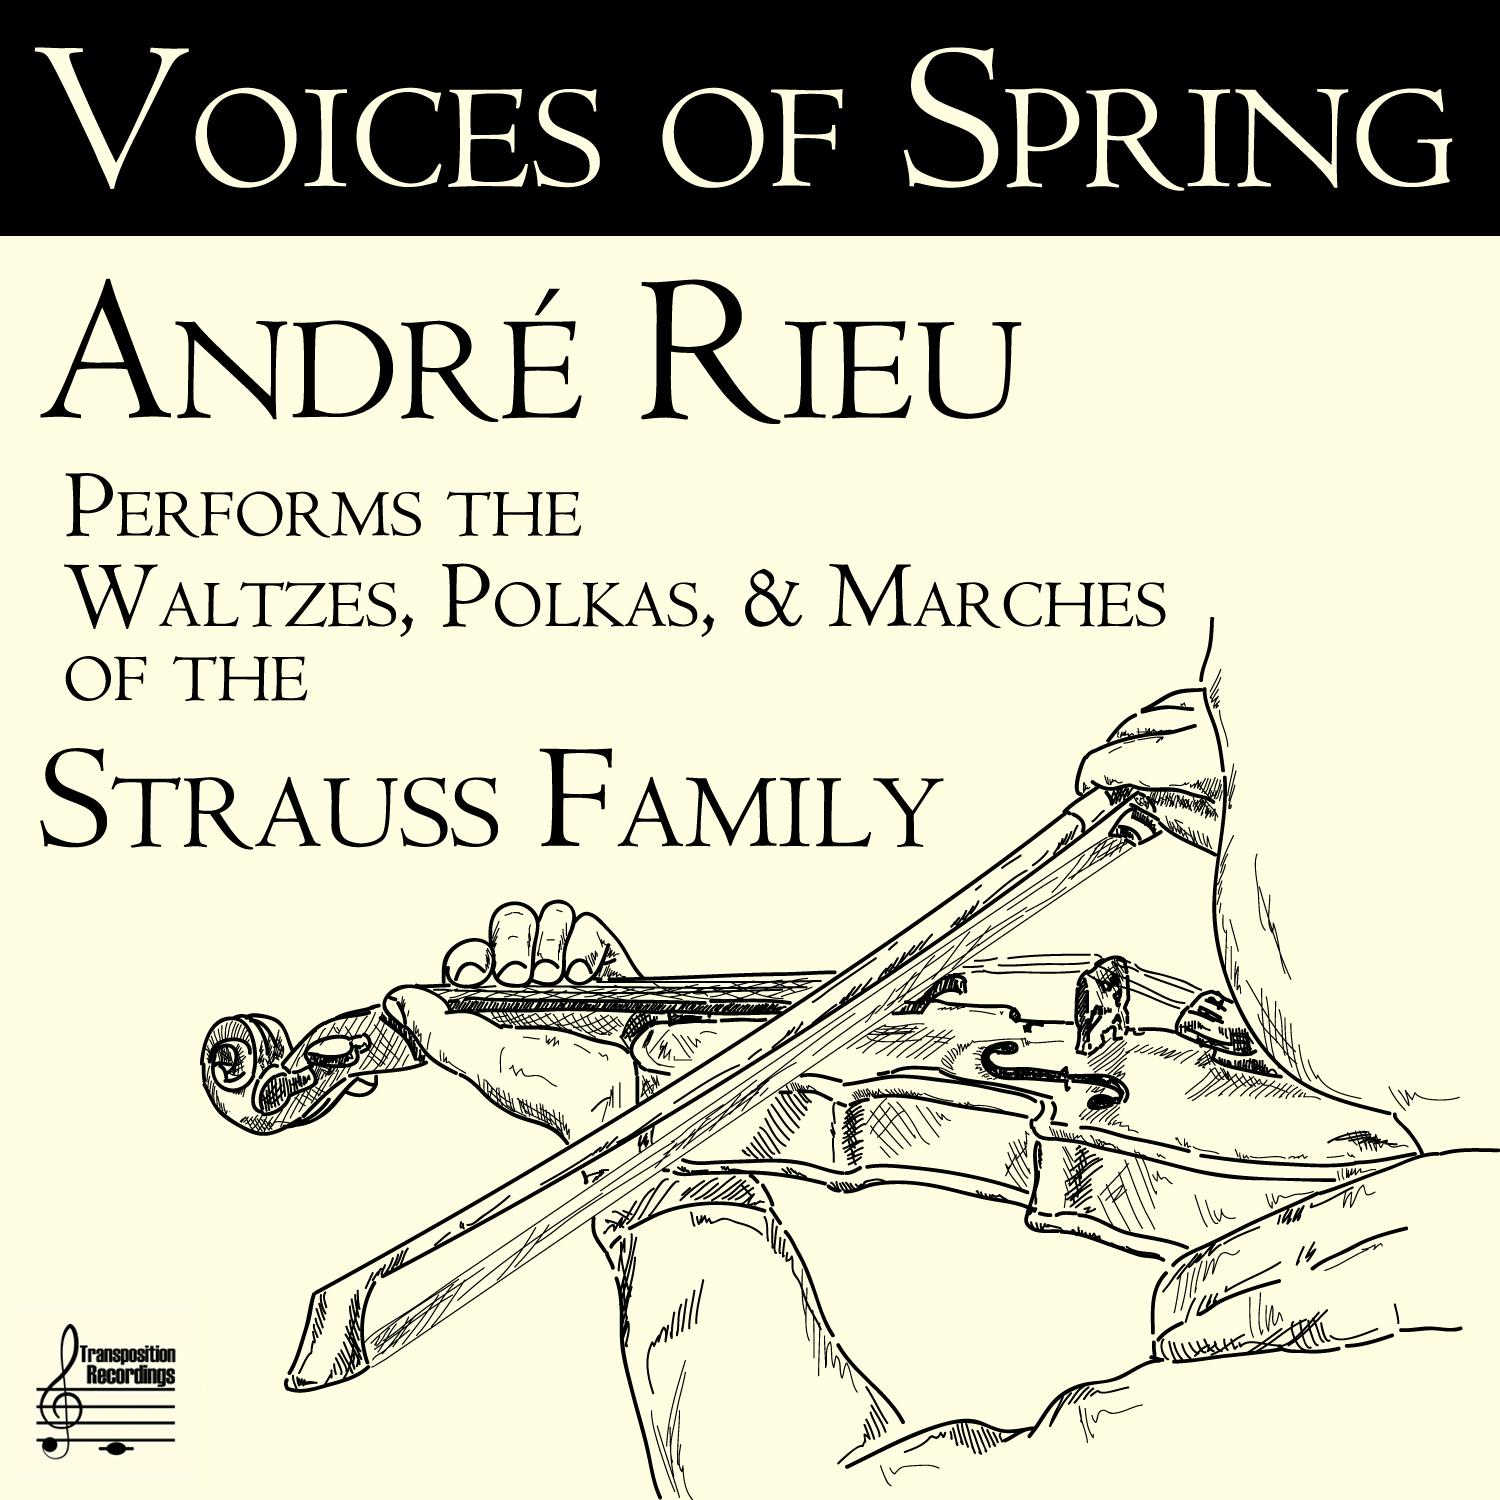 Voices of Spring: Andre Rieu Performs the Waltzes, Polkas,  Marches of the Strauss Family